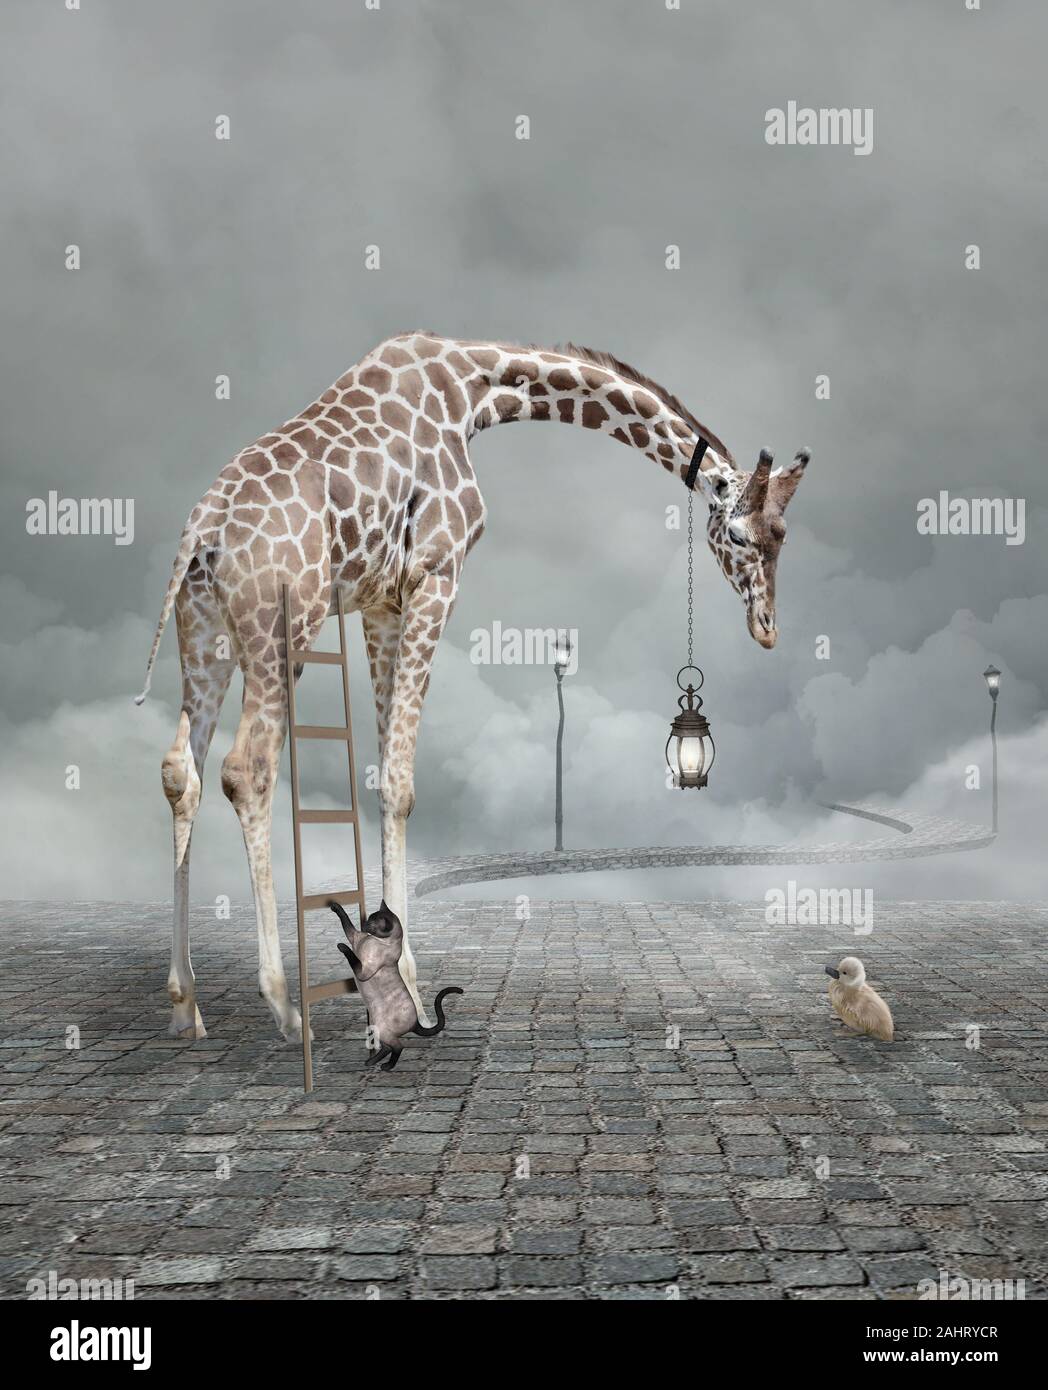 Find a friend – Surreal conceptual illustration of a giraffe meeting a baby chicken Stock Photo